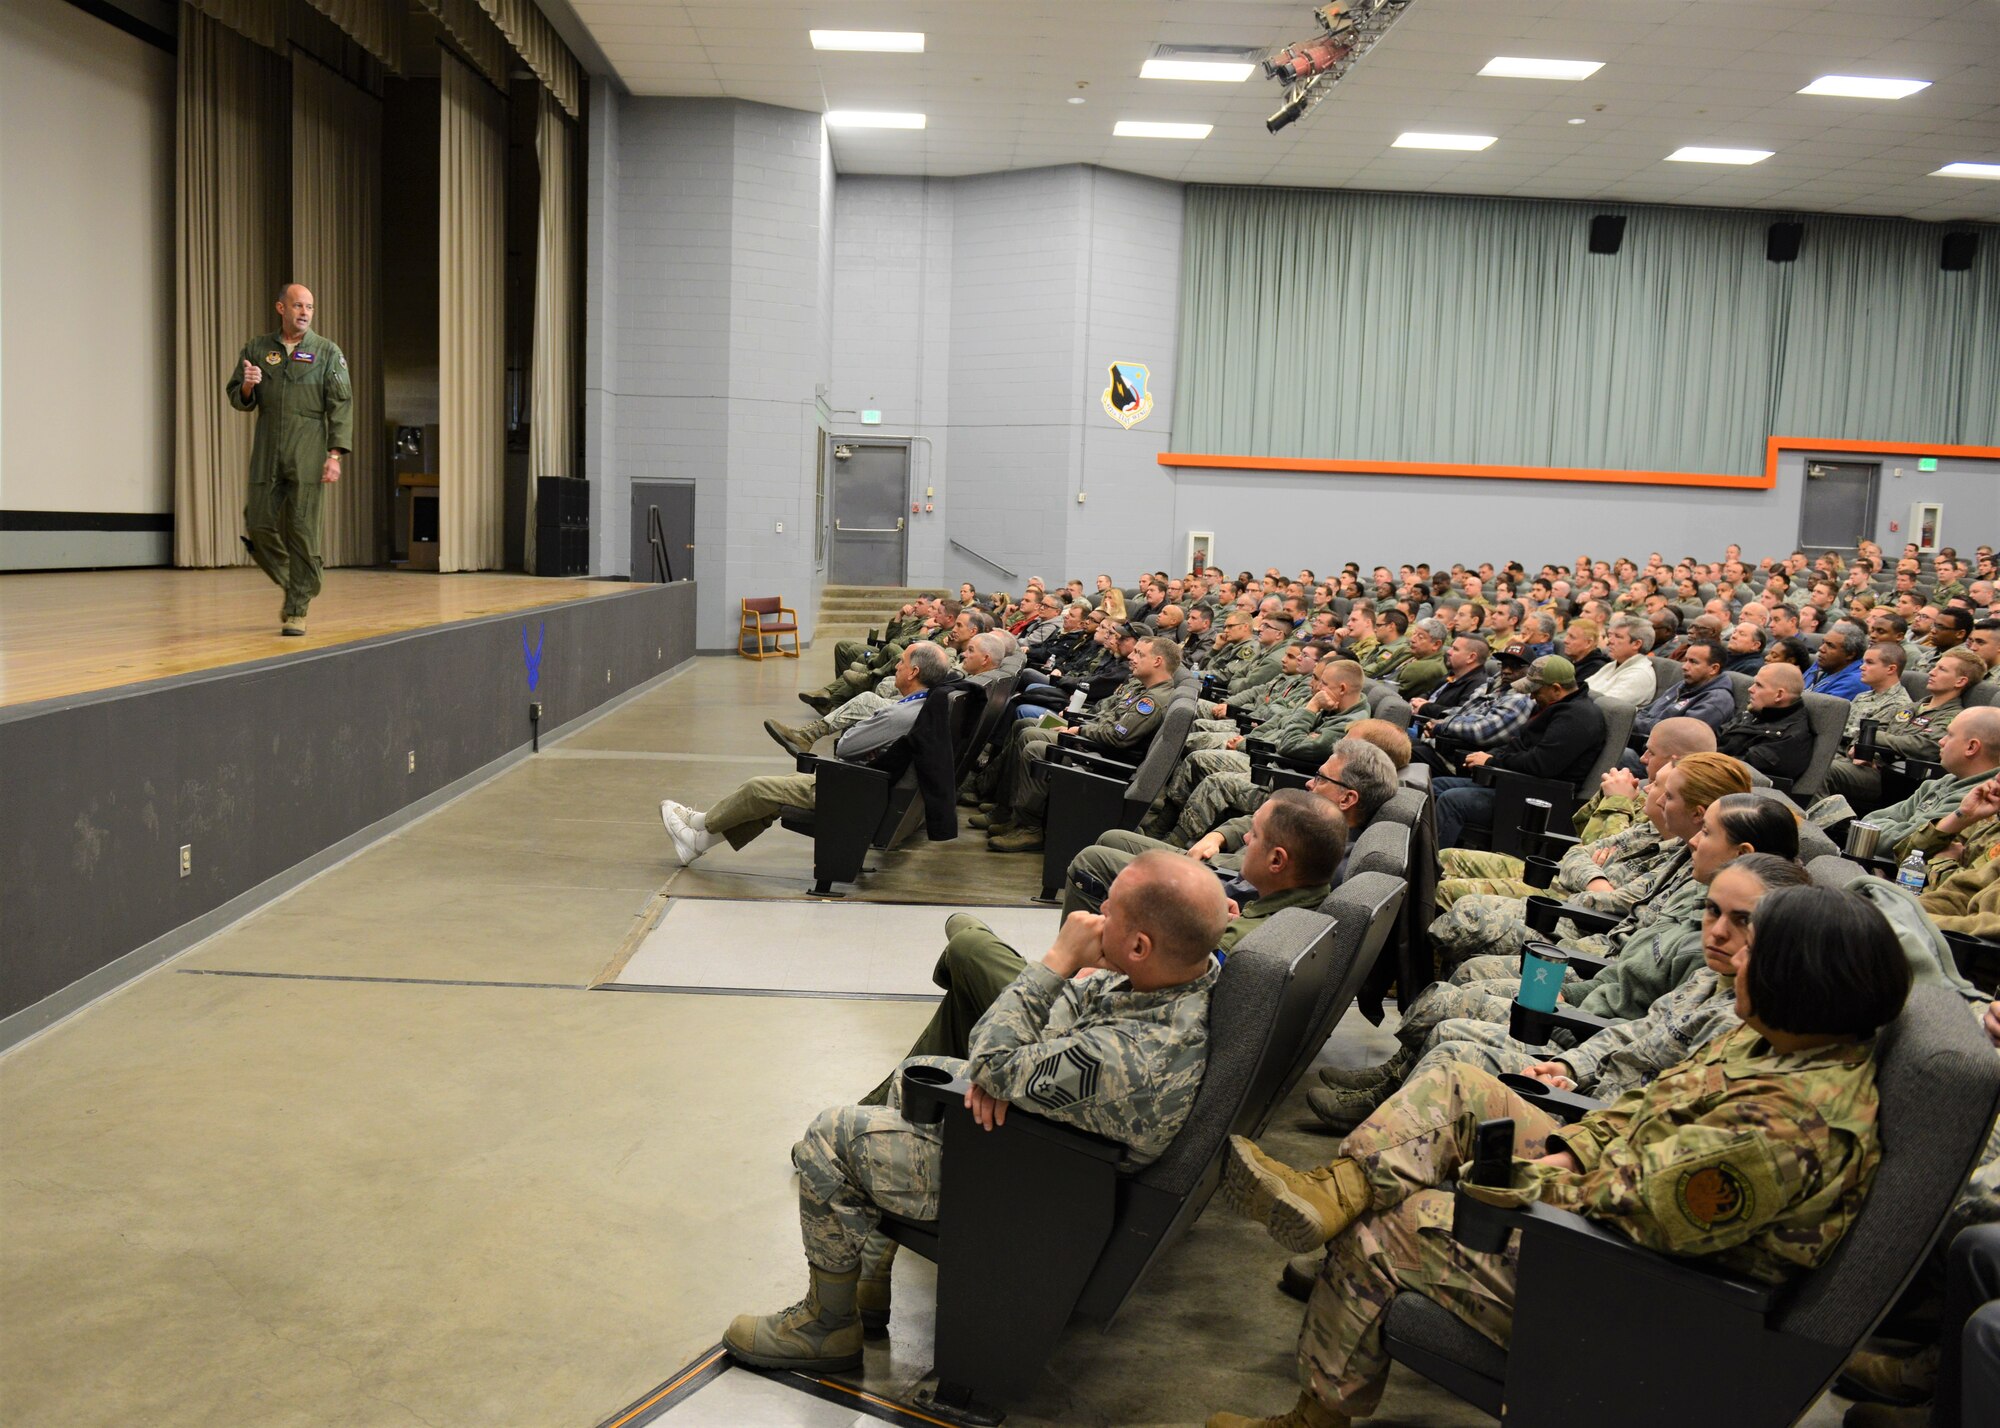 Brig. Gen. E. John Teichert, 412th Test Wing commander, addresses a packed base theater Jan. 2 for the wing’s annual Back in the Saddle event. (U.S. Air Force photo by Kenji Thuloweit)